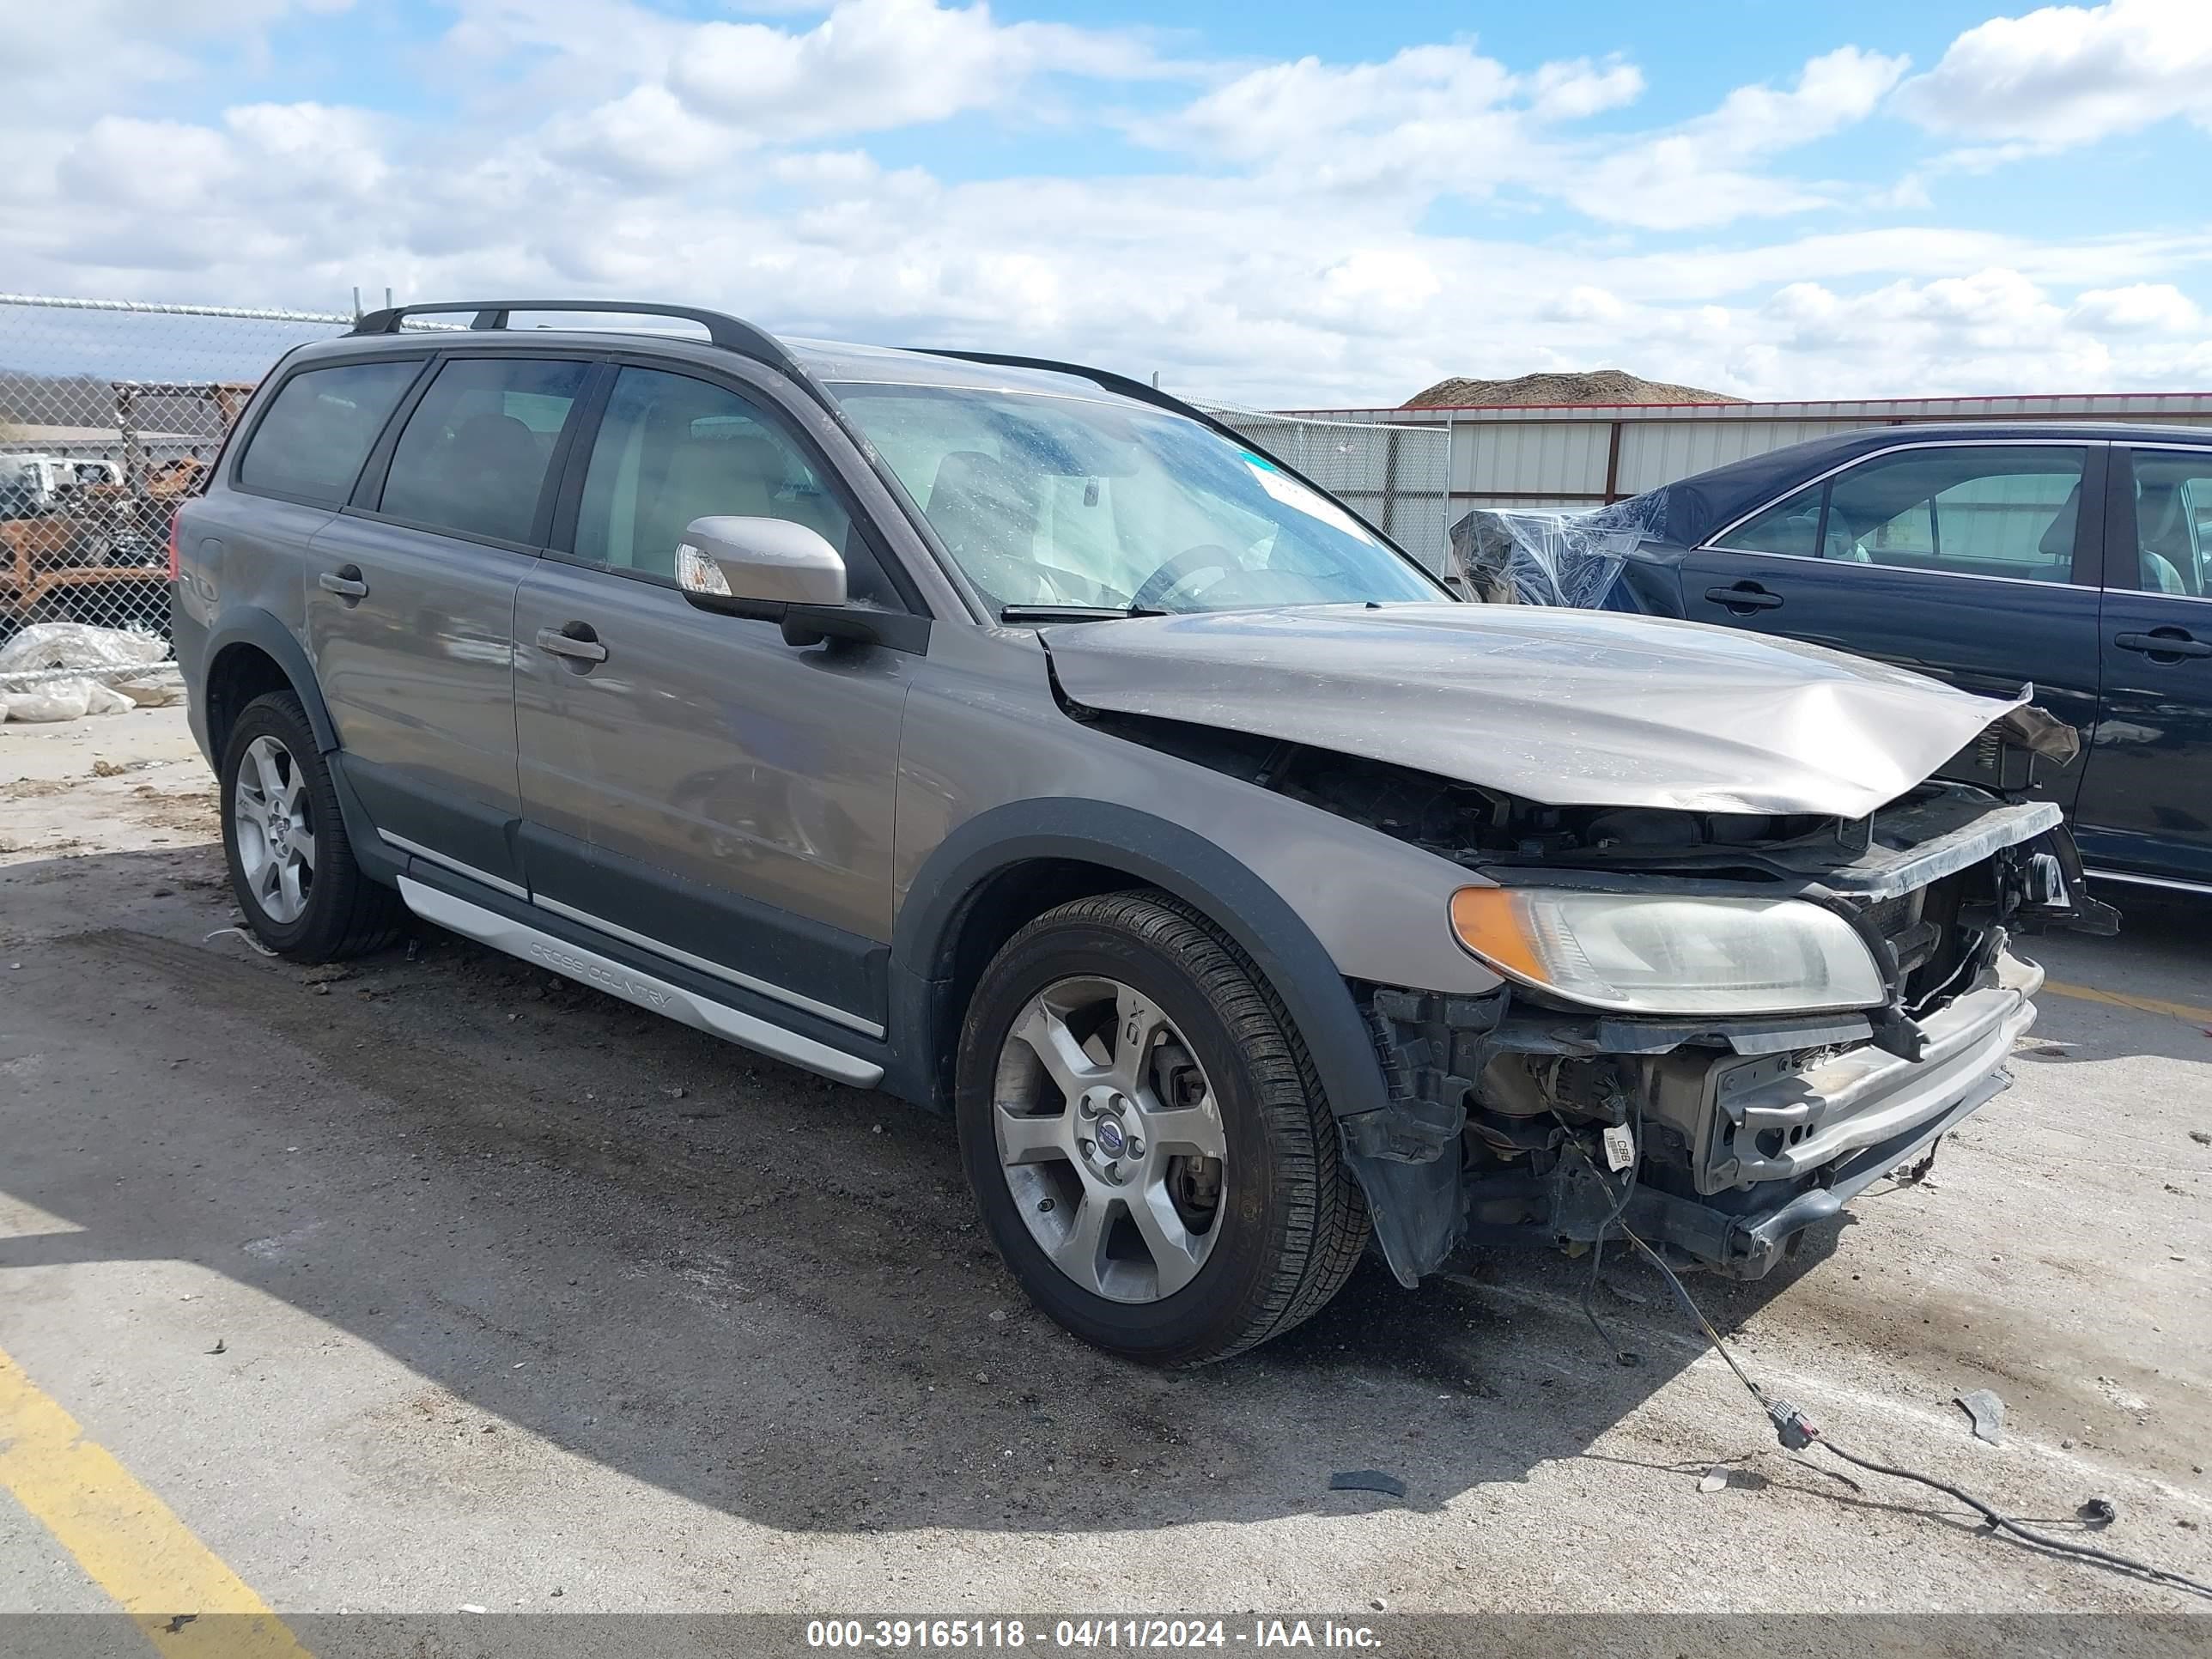 vin: YV4BZ982581039226 YV4BZ982581039226 2008 volvo xc70 3200 for Sale in 50069, 1000 Armstrong Dr, De Soto, Iowa, USA